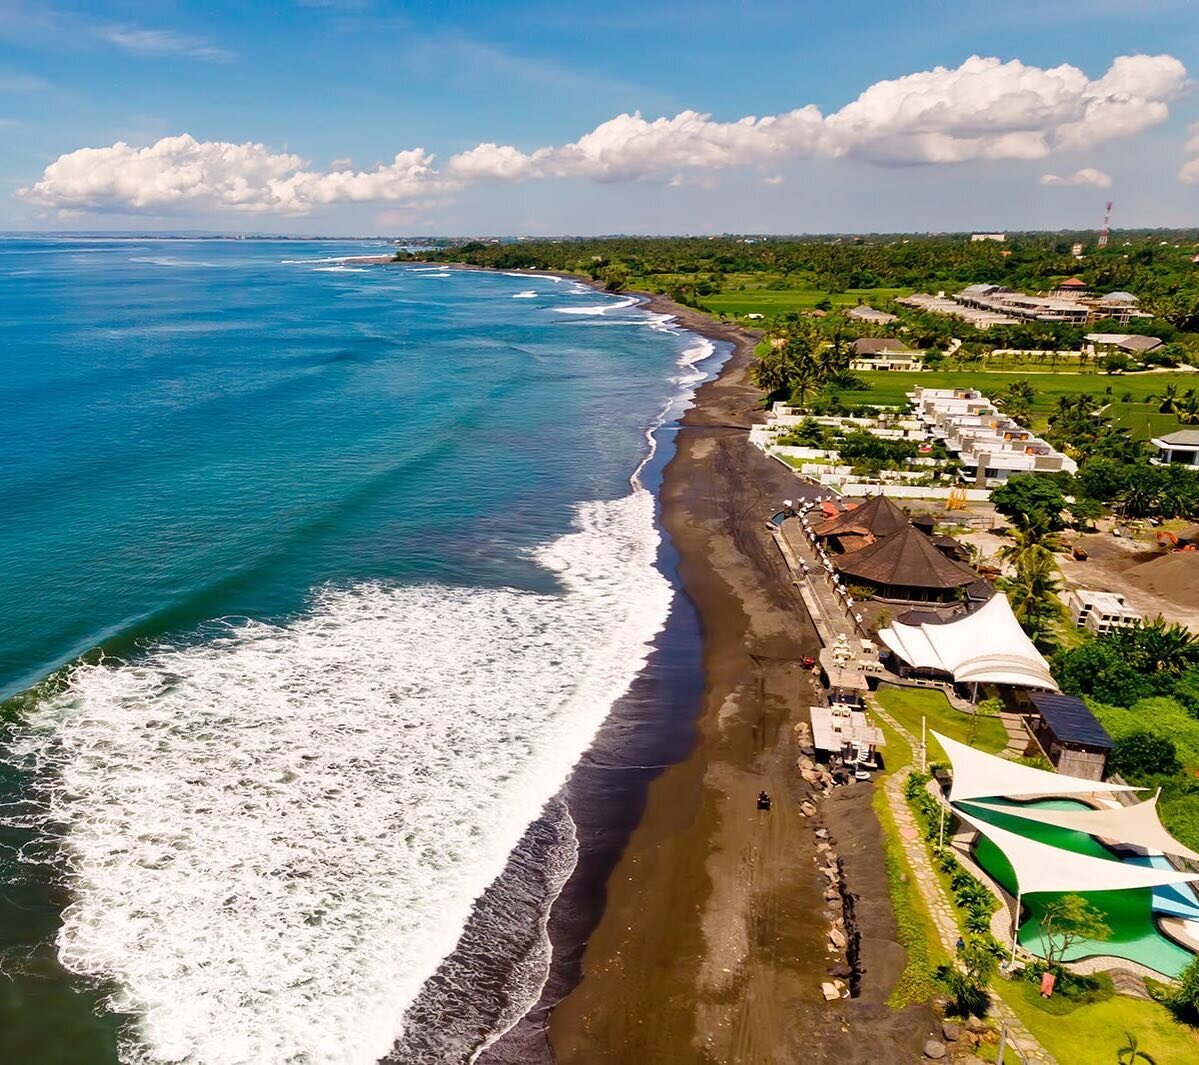 The colors of Keramas. 💙 

The blue skies, green fields, and even black sand beaches (filled with some extra special sparkle) are ready to welcome our new group of YTT students next week in Keramas Beach, Bali. 🏝 

Time to get our yoga on, and we c